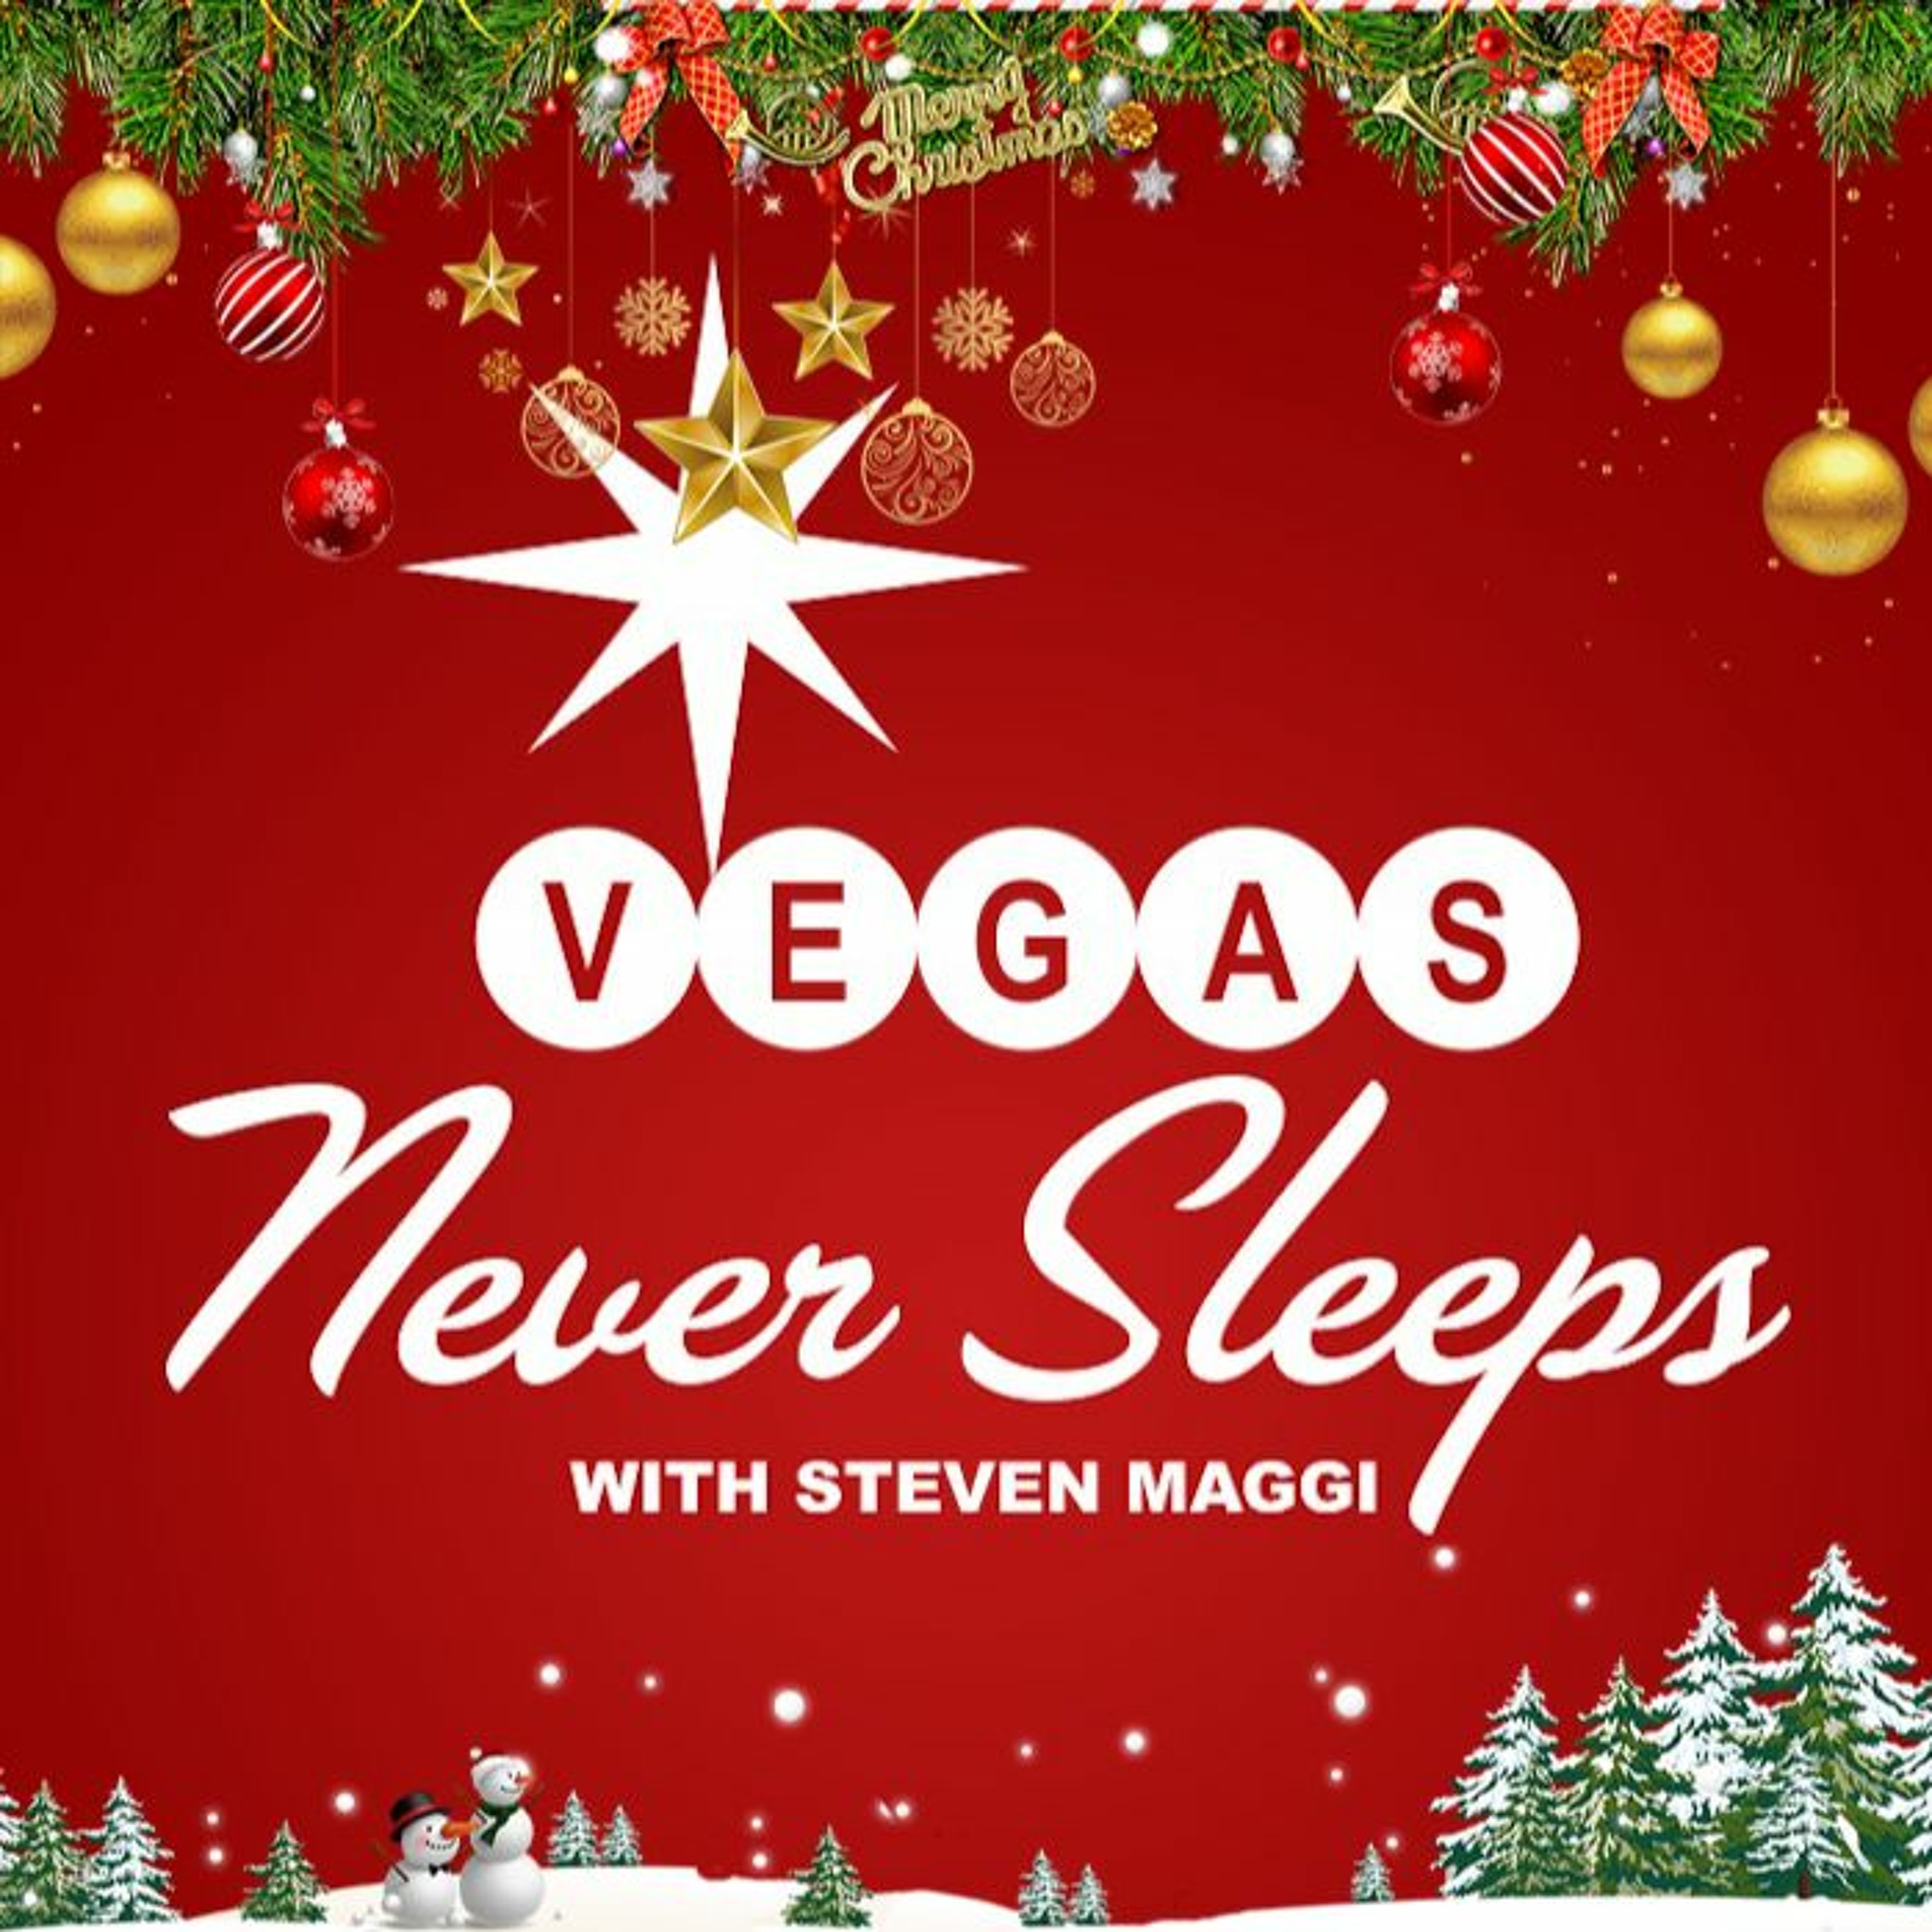 "Christmas in Las Vegas" - An Unforgettable Holiday Special